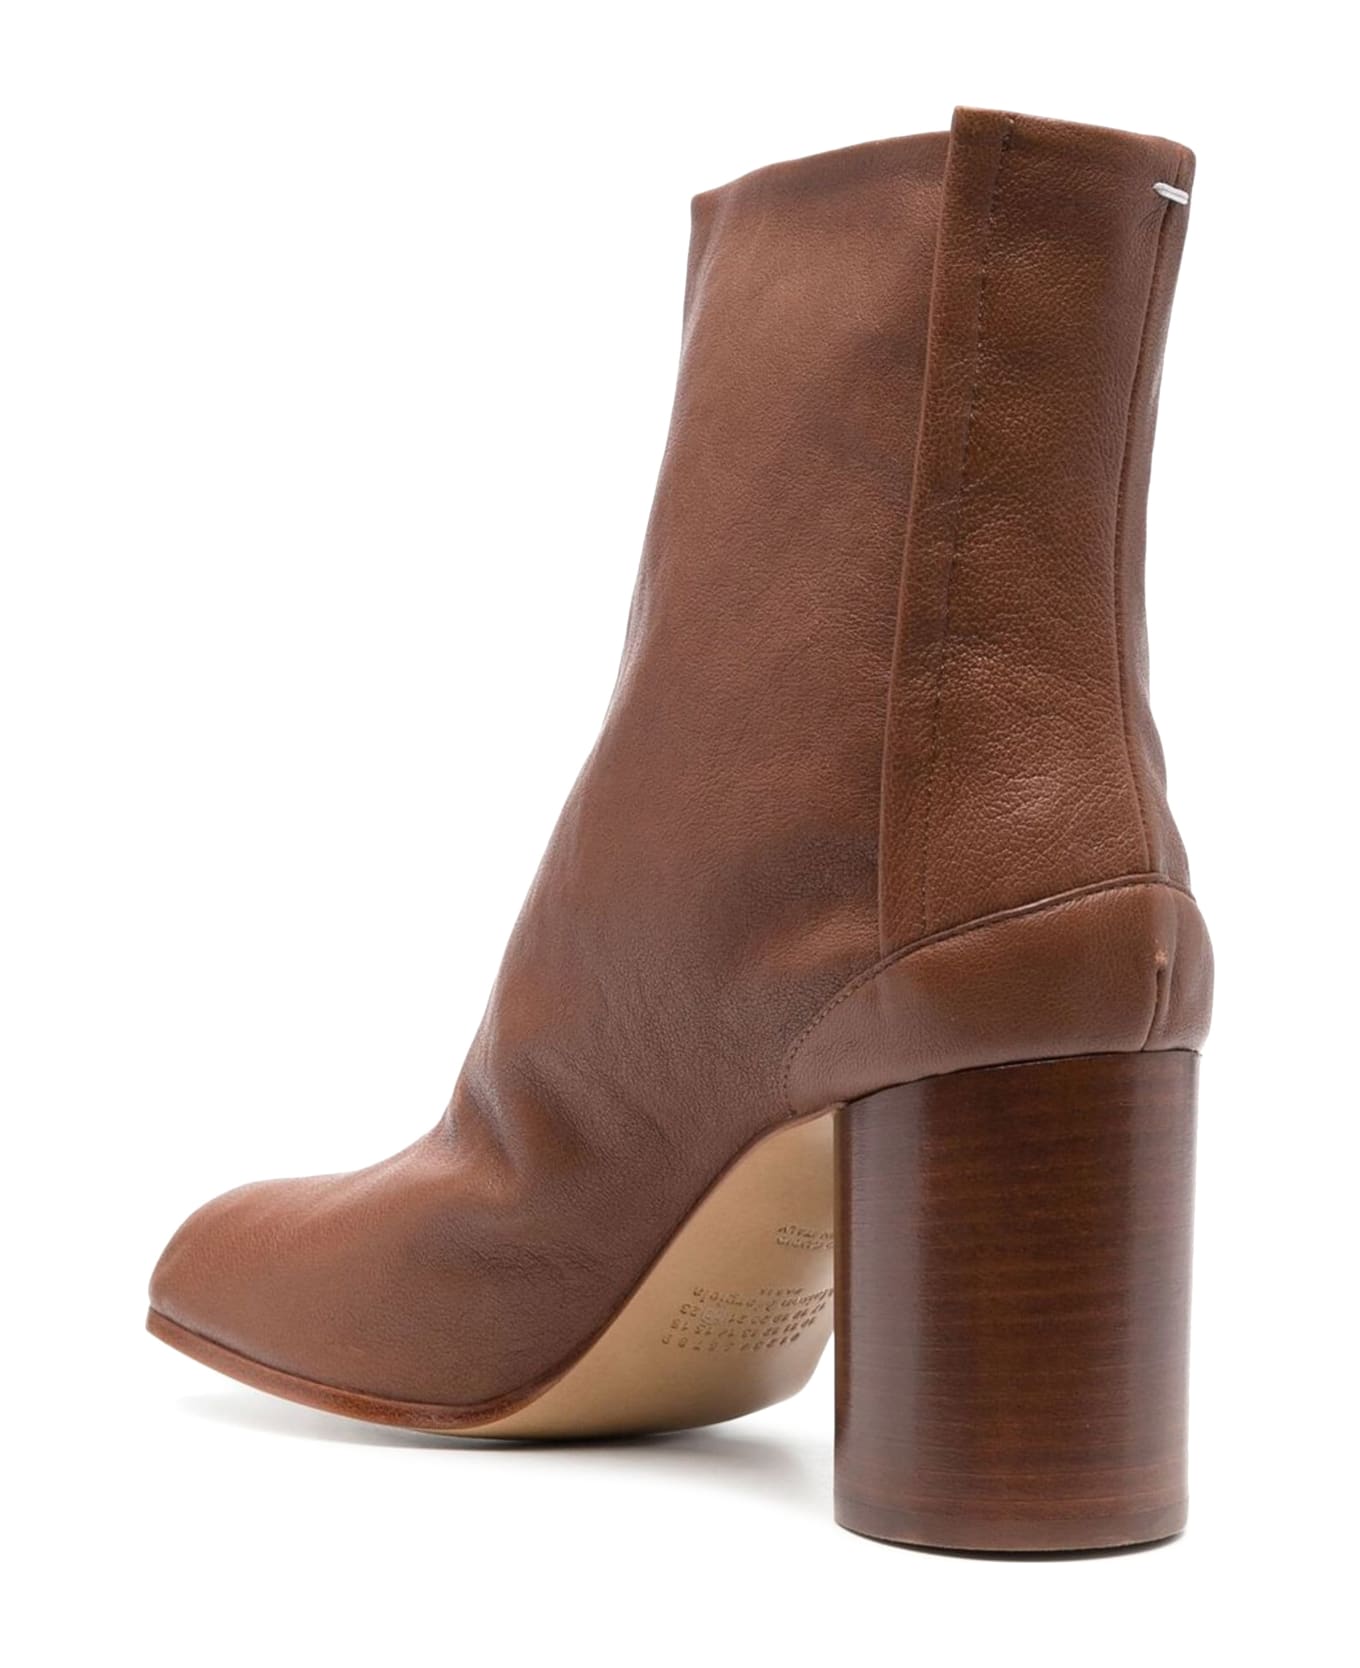 Maison Margiela Tabi Ankle Boots H80 - Tobacco Brown